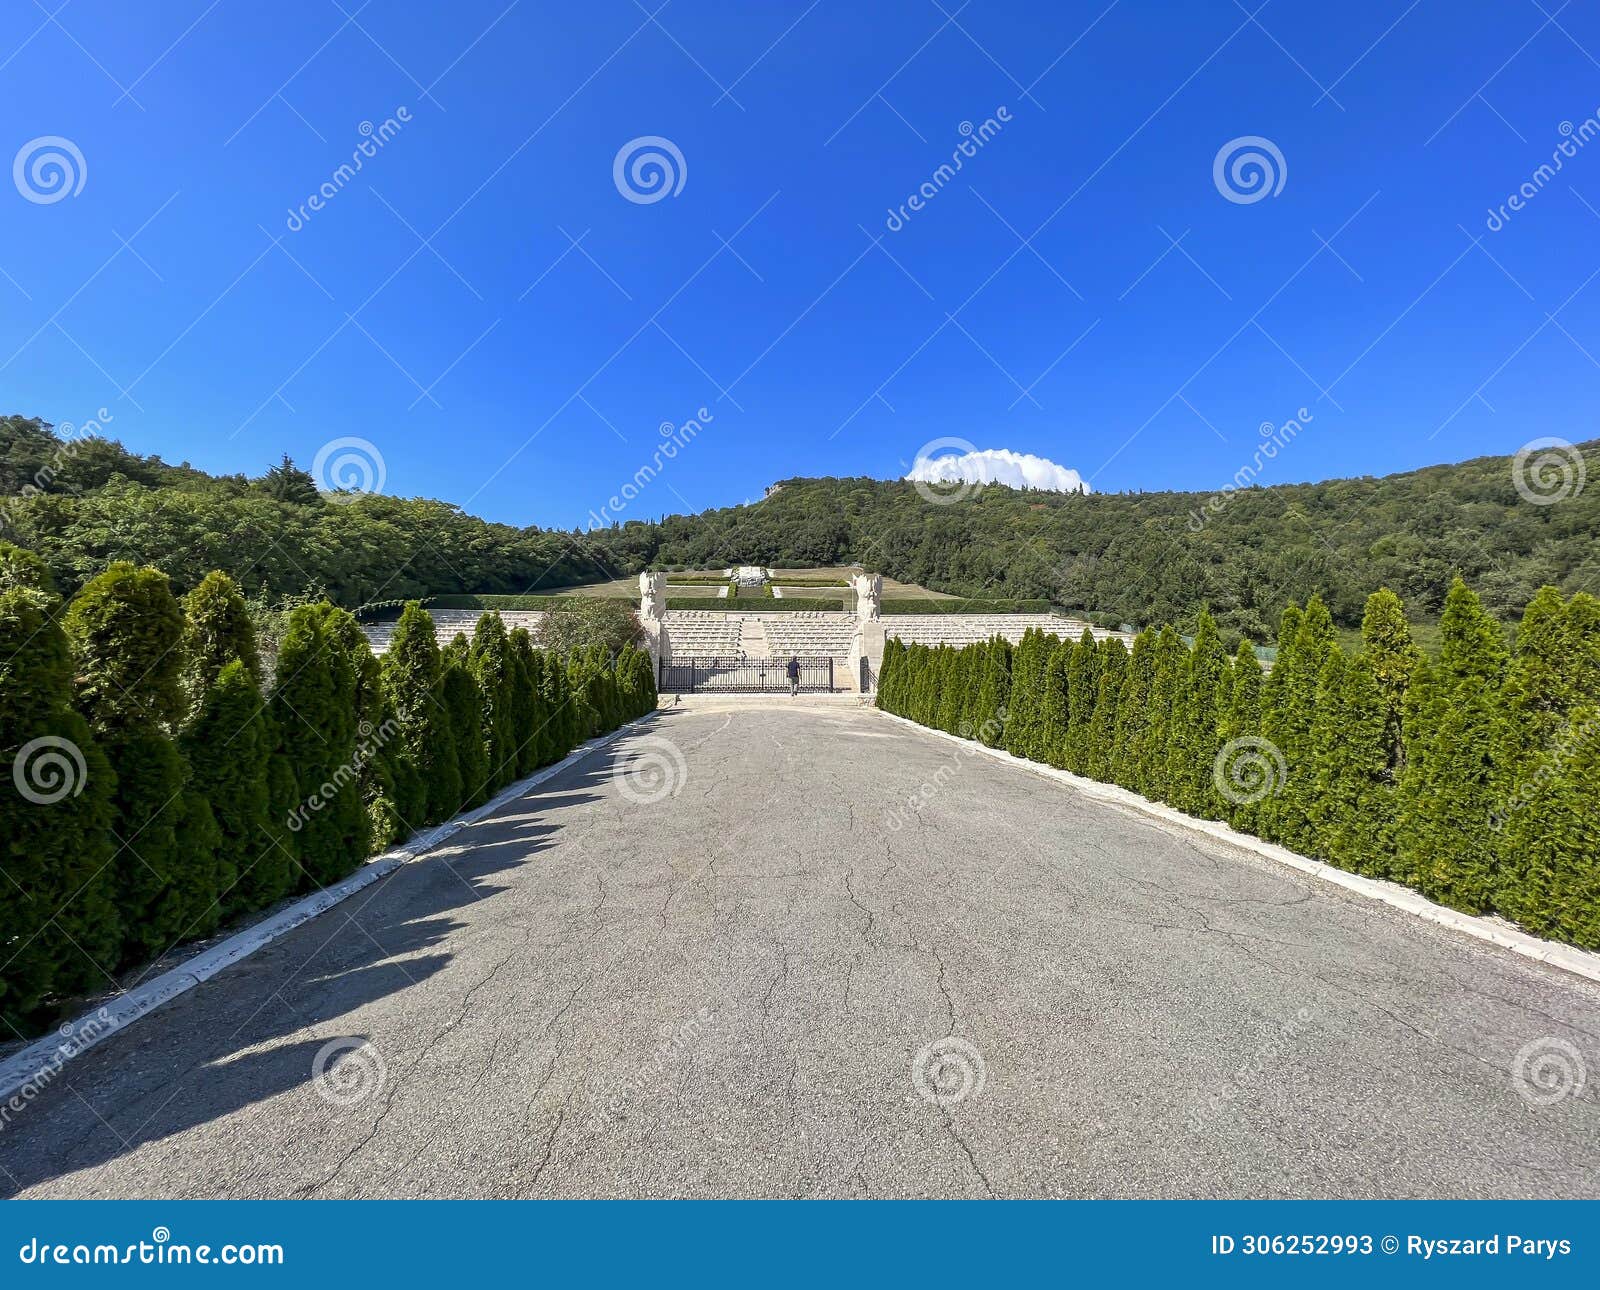 polish military cemetery at monte cassino in italy, general view